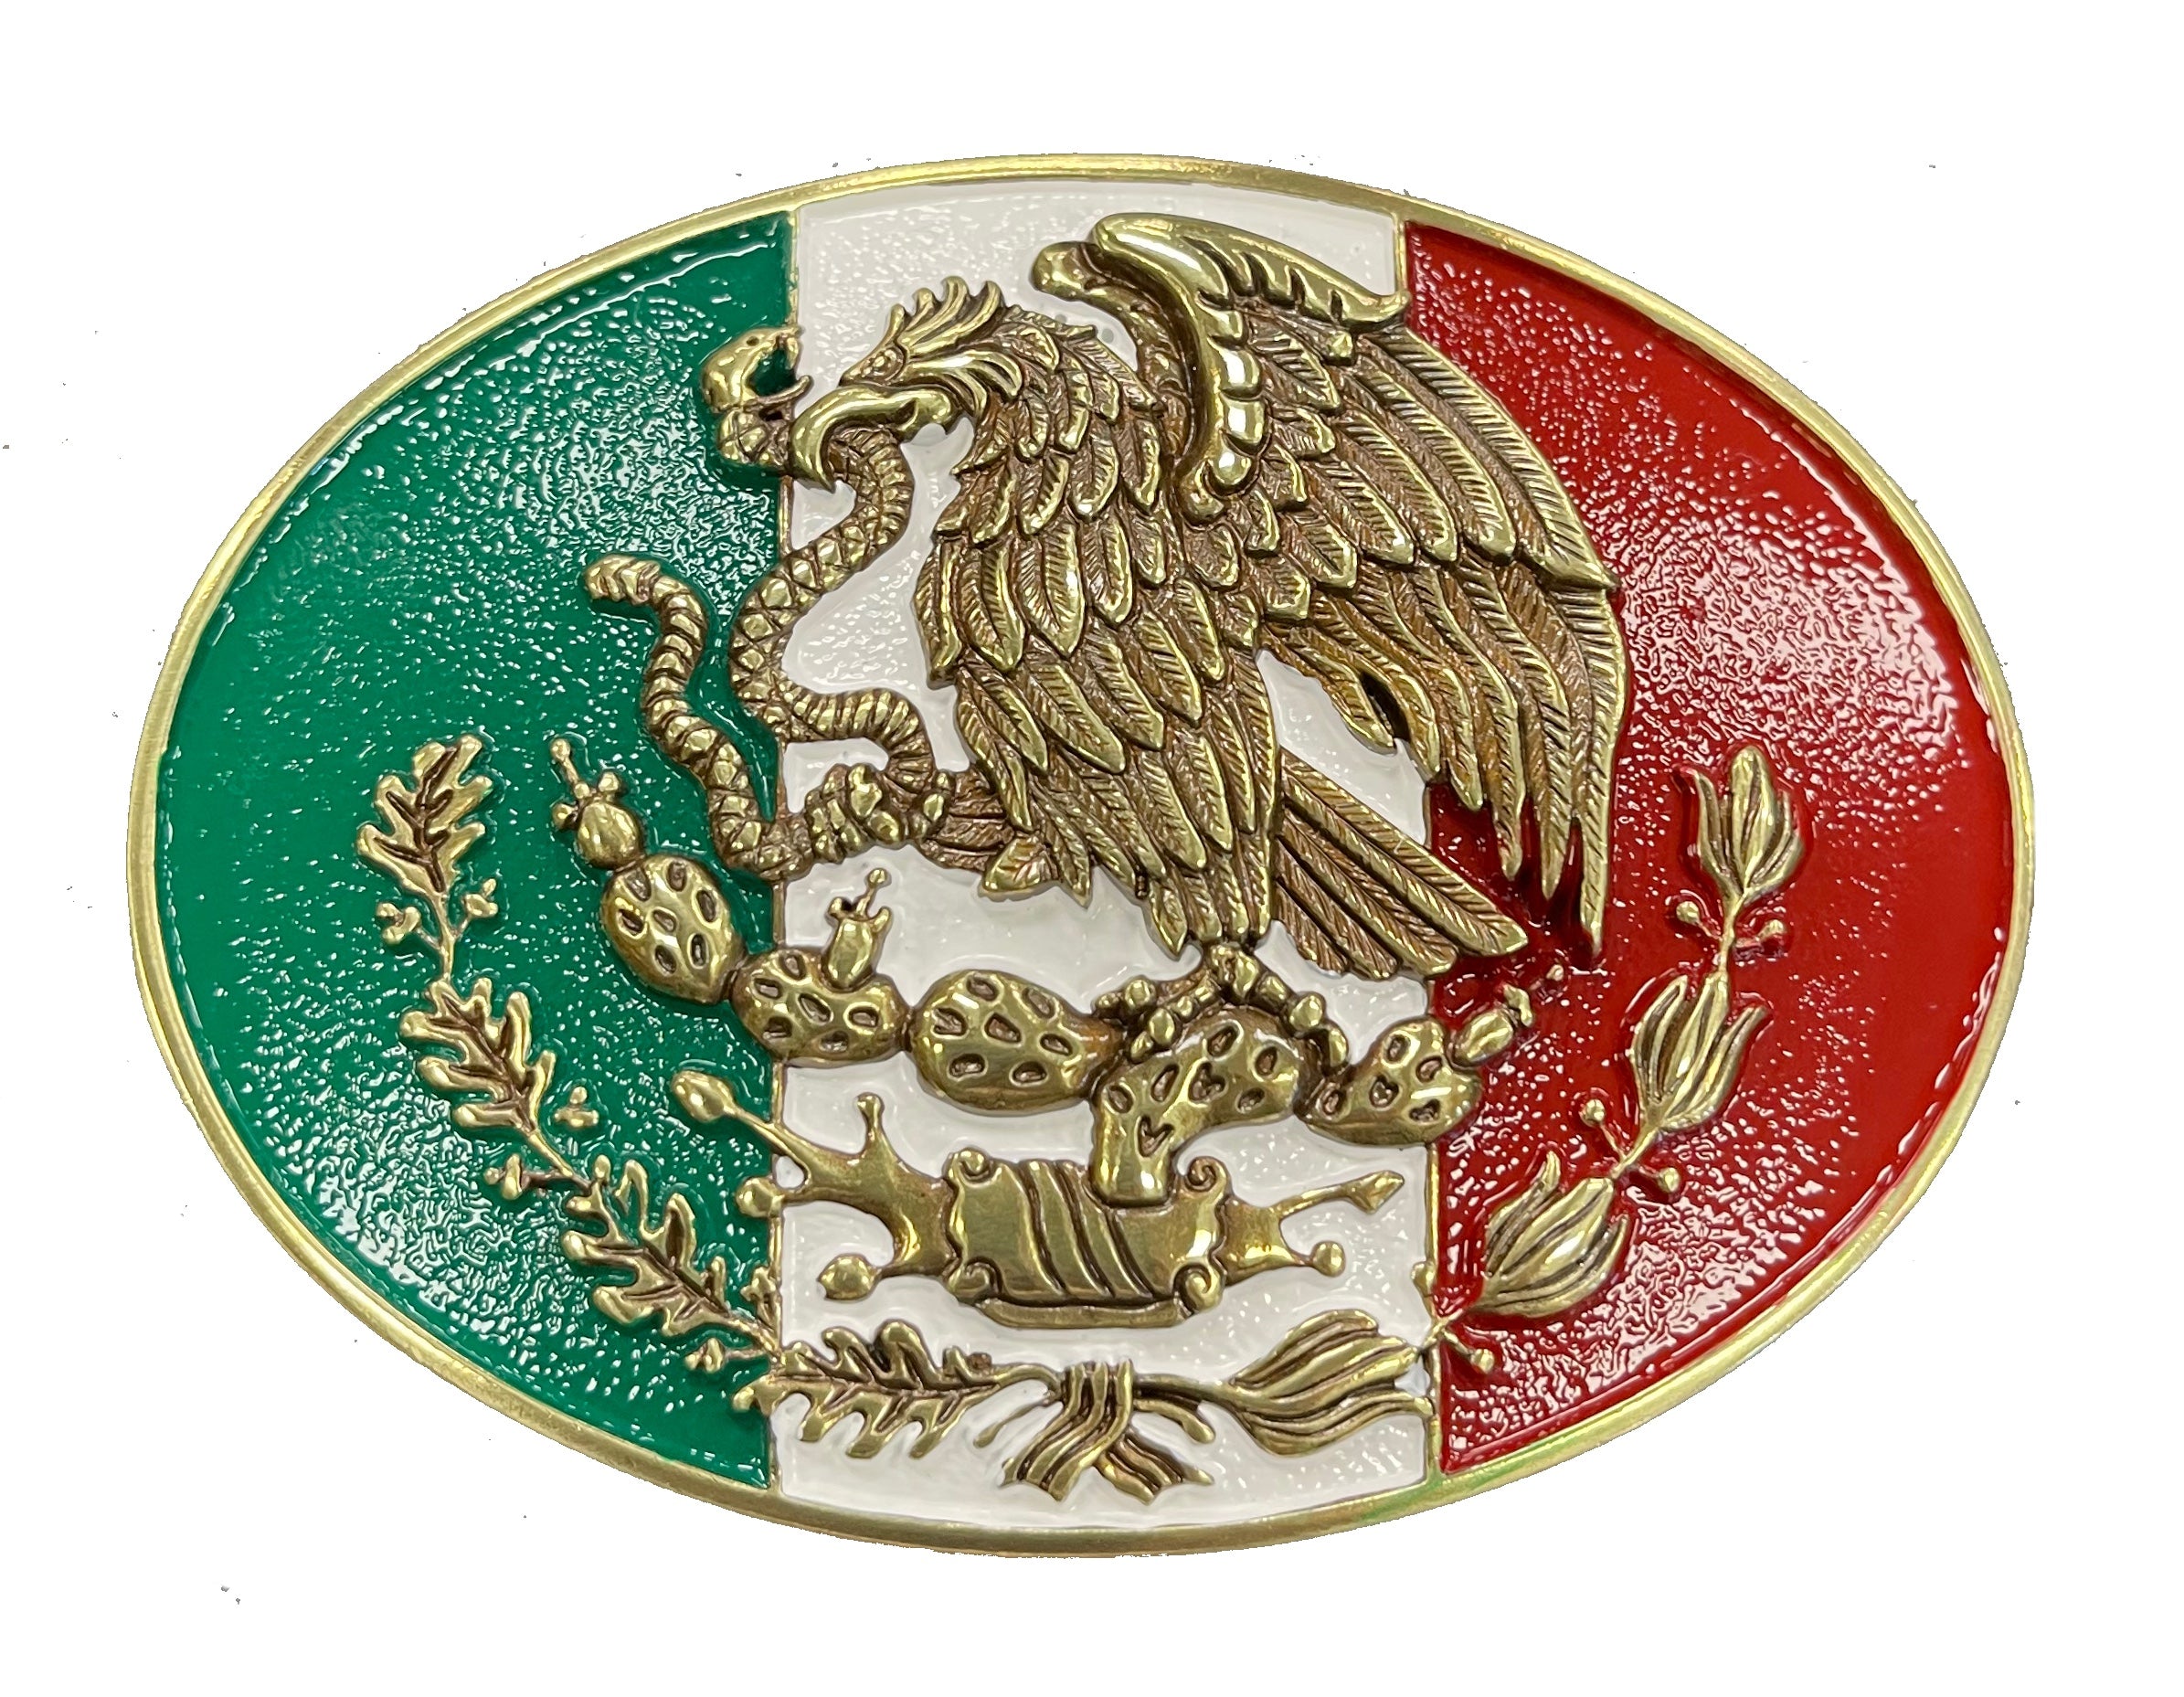 Mexico Oval Belt Buckle